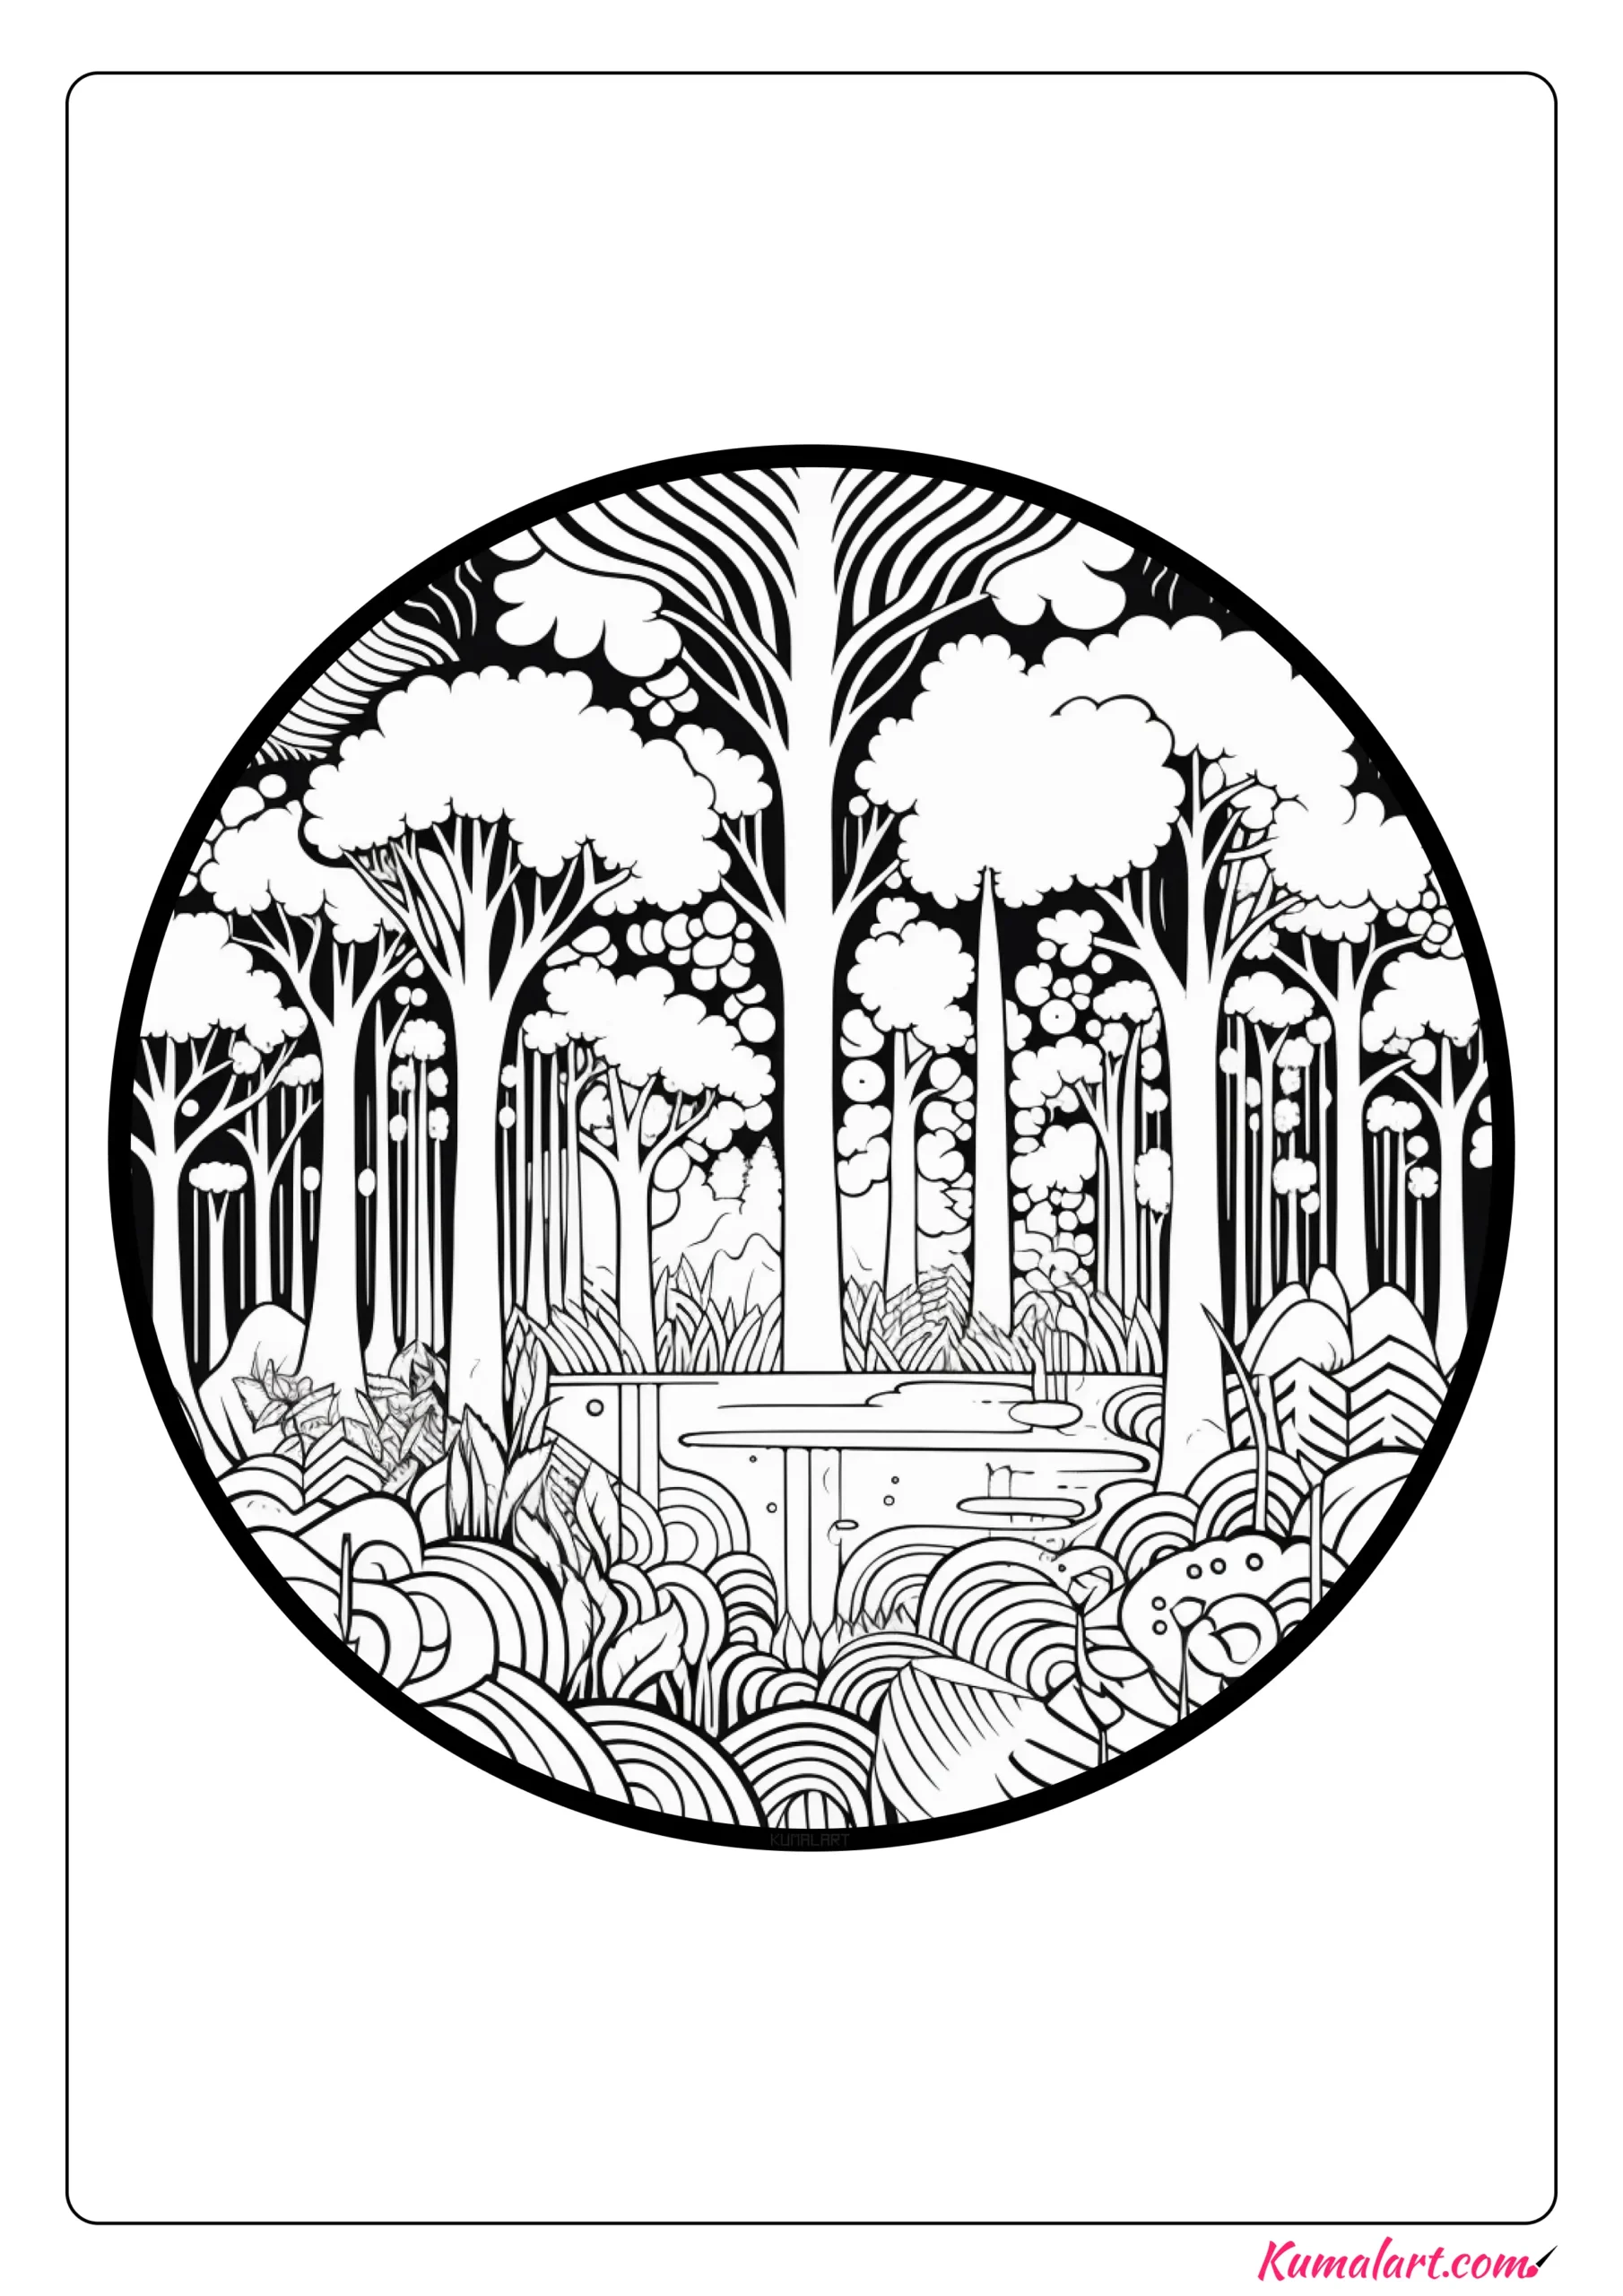 Resplendent Rainforest Coloring Page